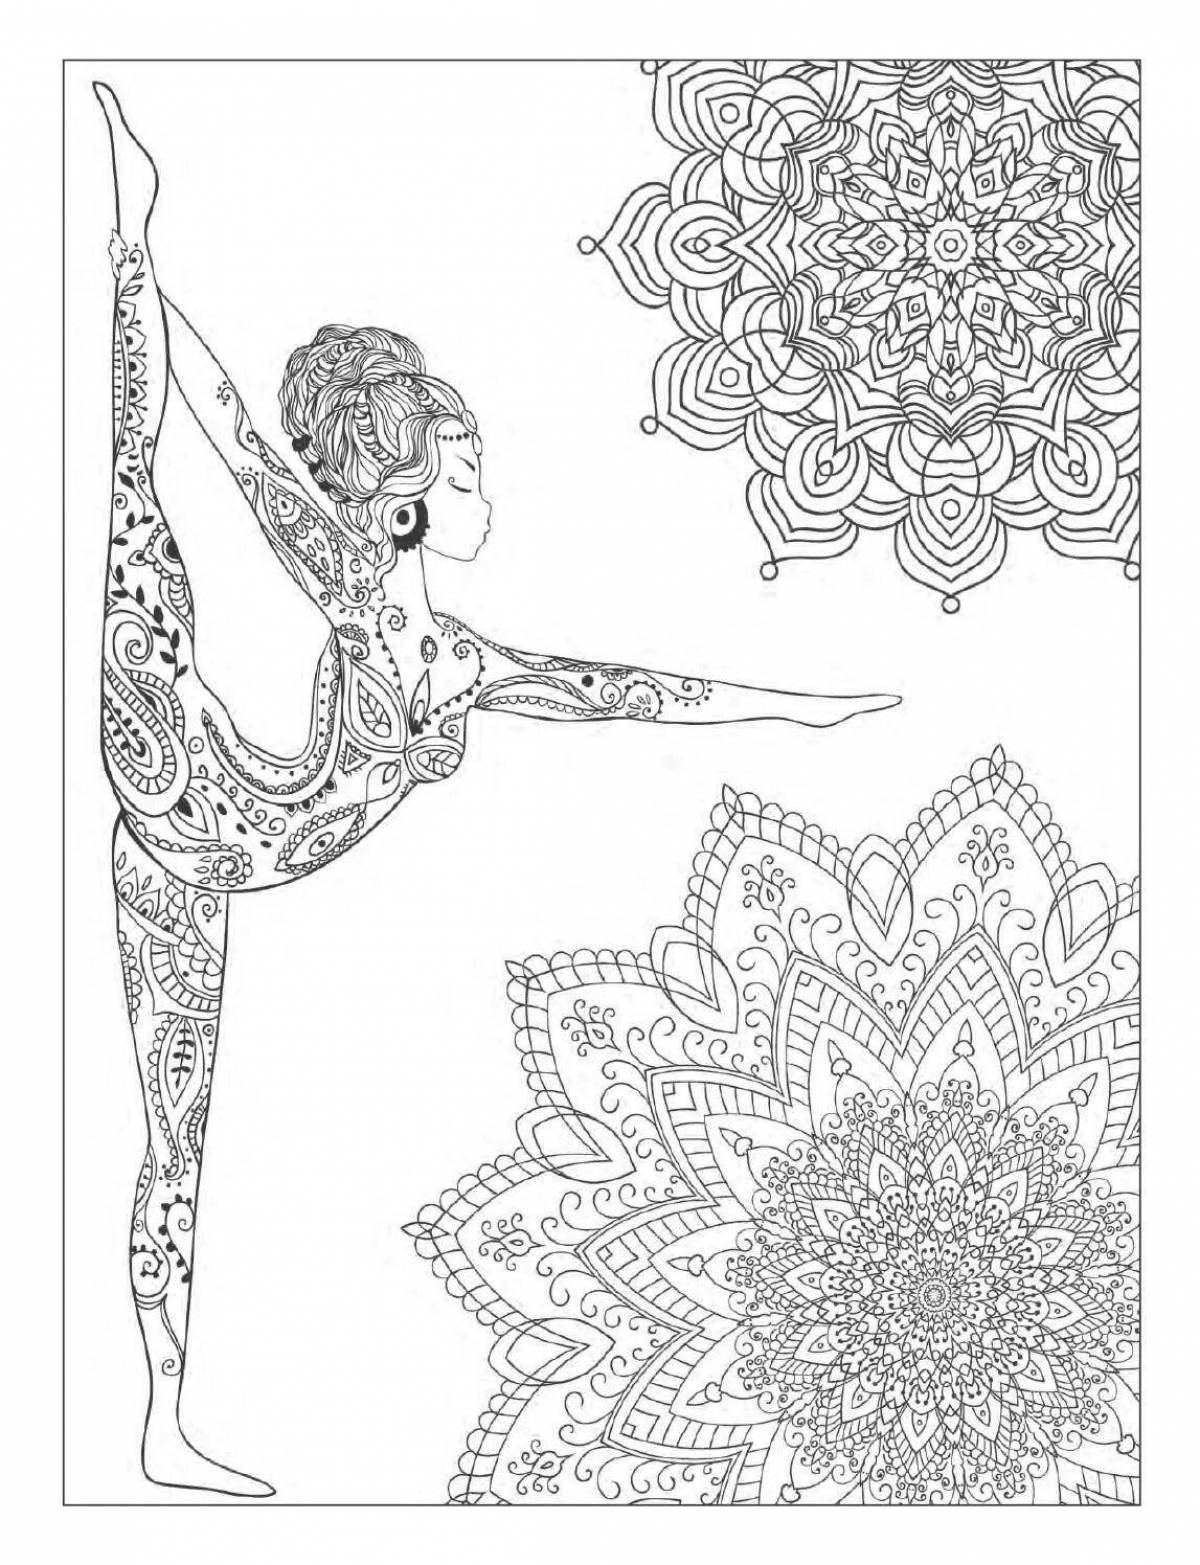 Tempting gymnastics coloring book for girls